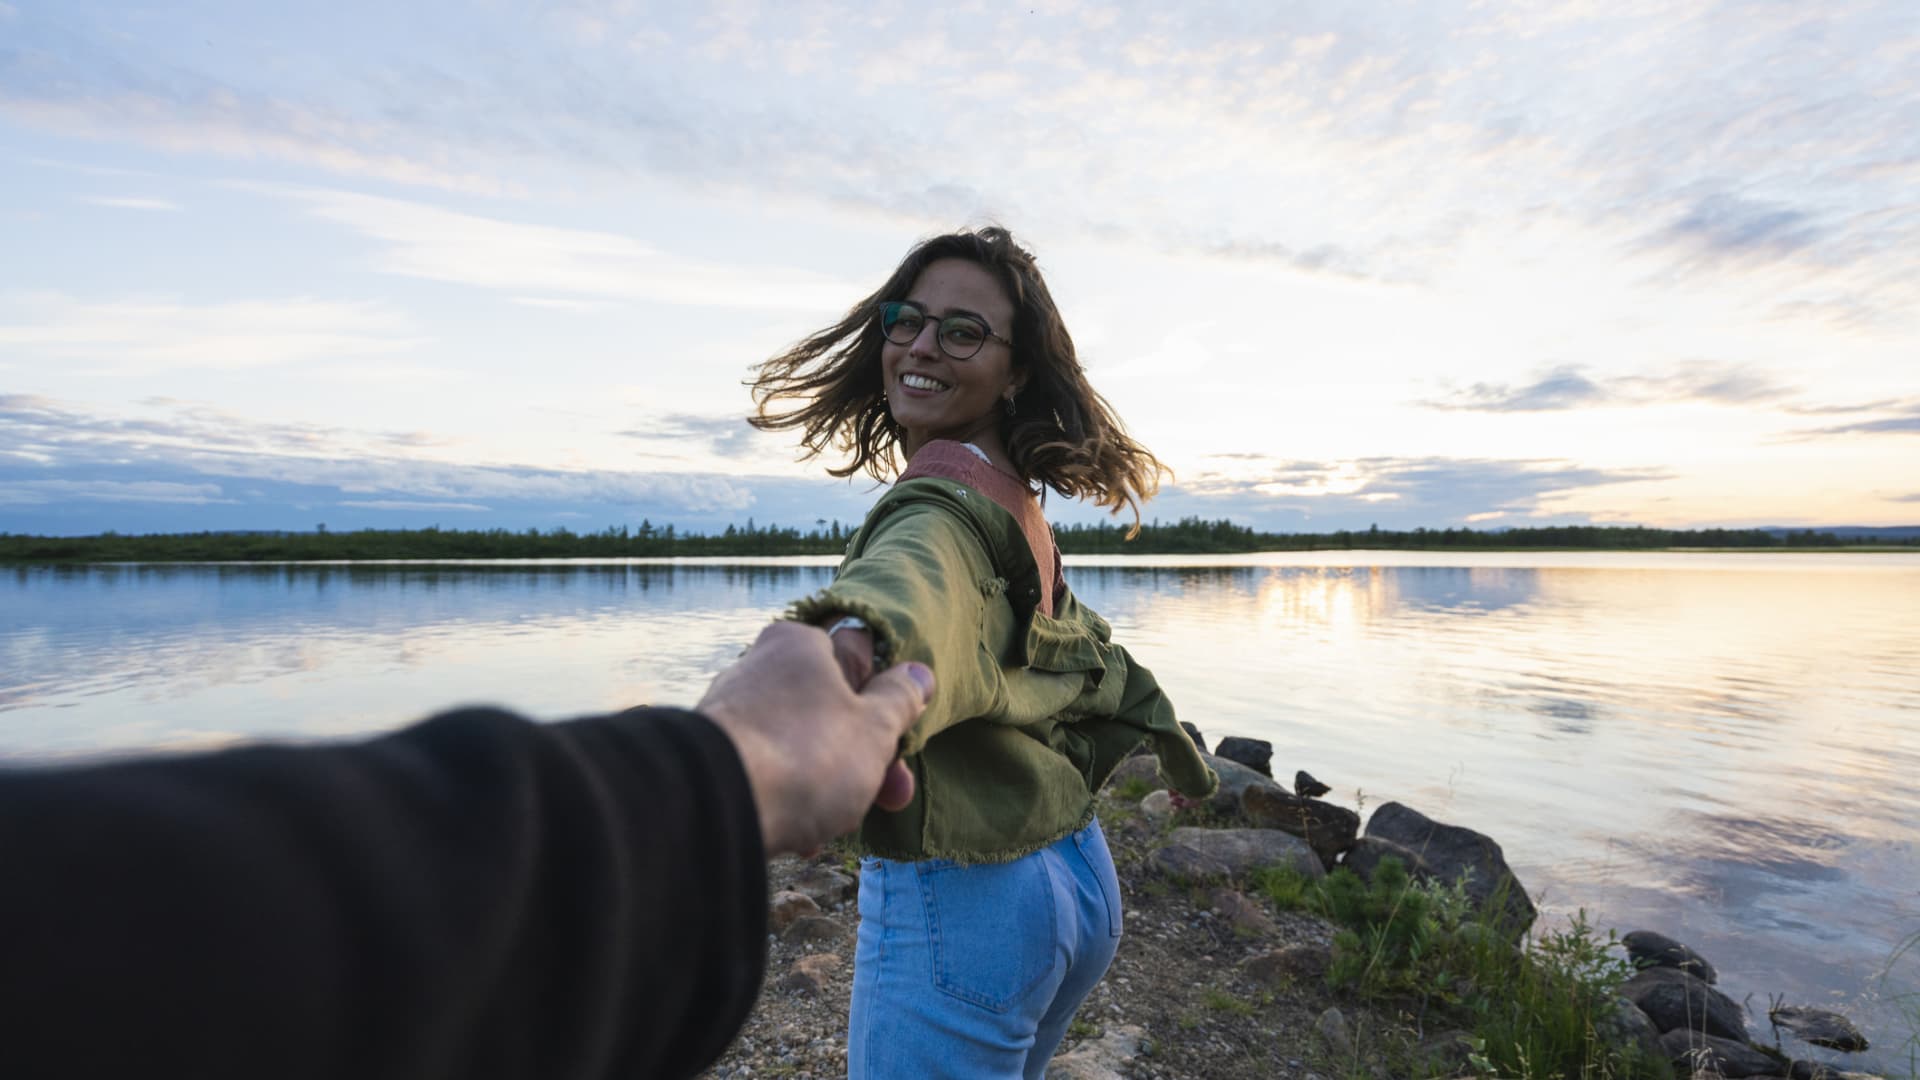 I took Finland’s masterclass on happiness: This is what I discovered